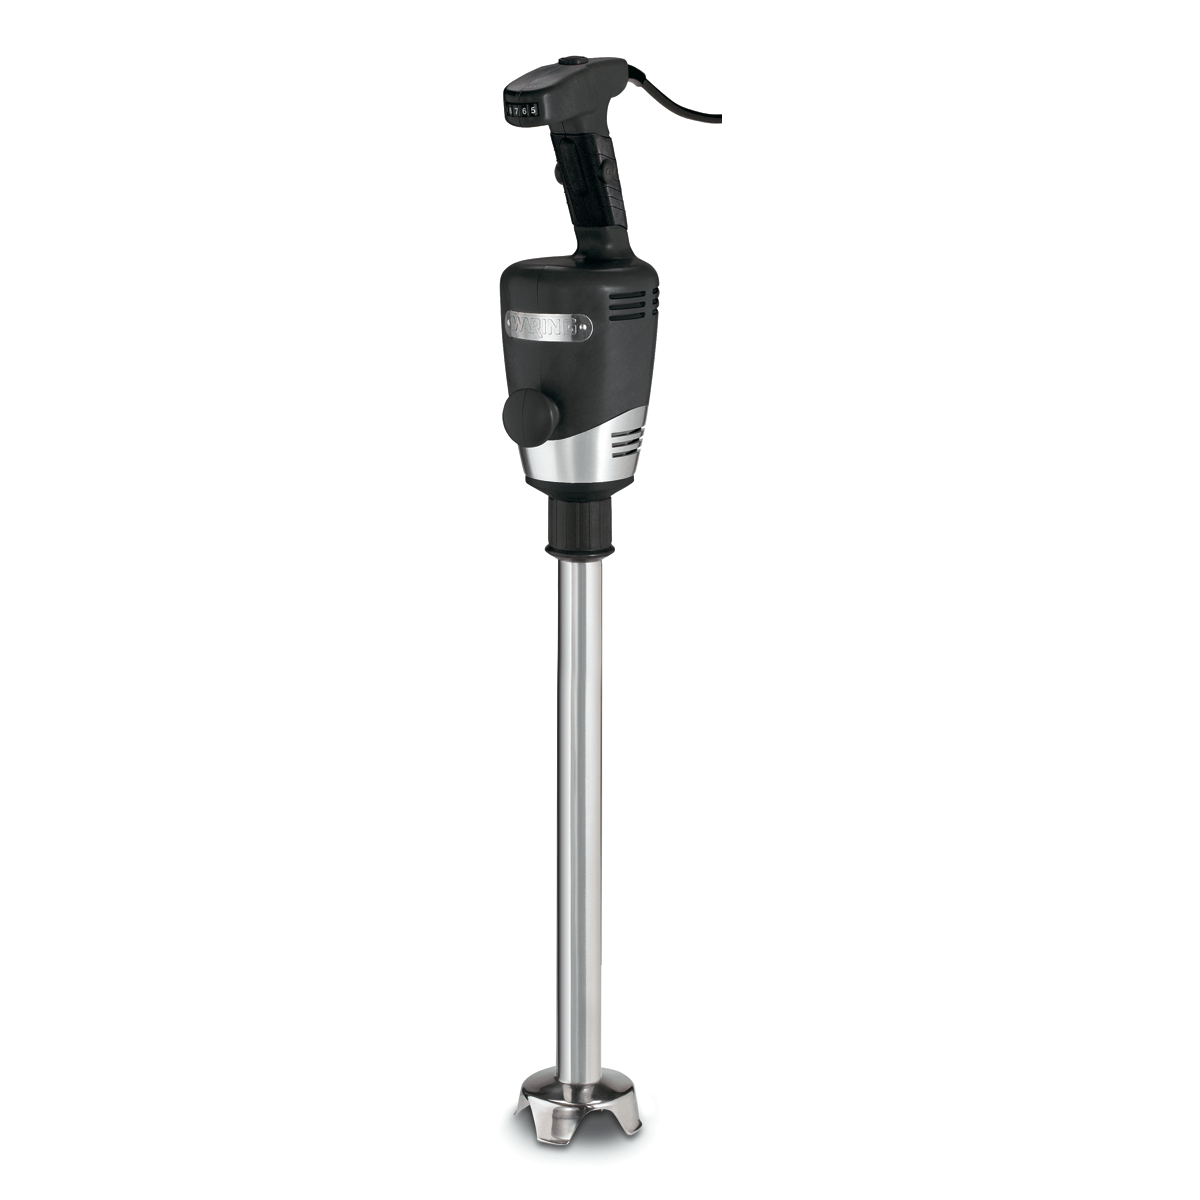 Waring Laboratory Science – Immersion Blender Power Pack